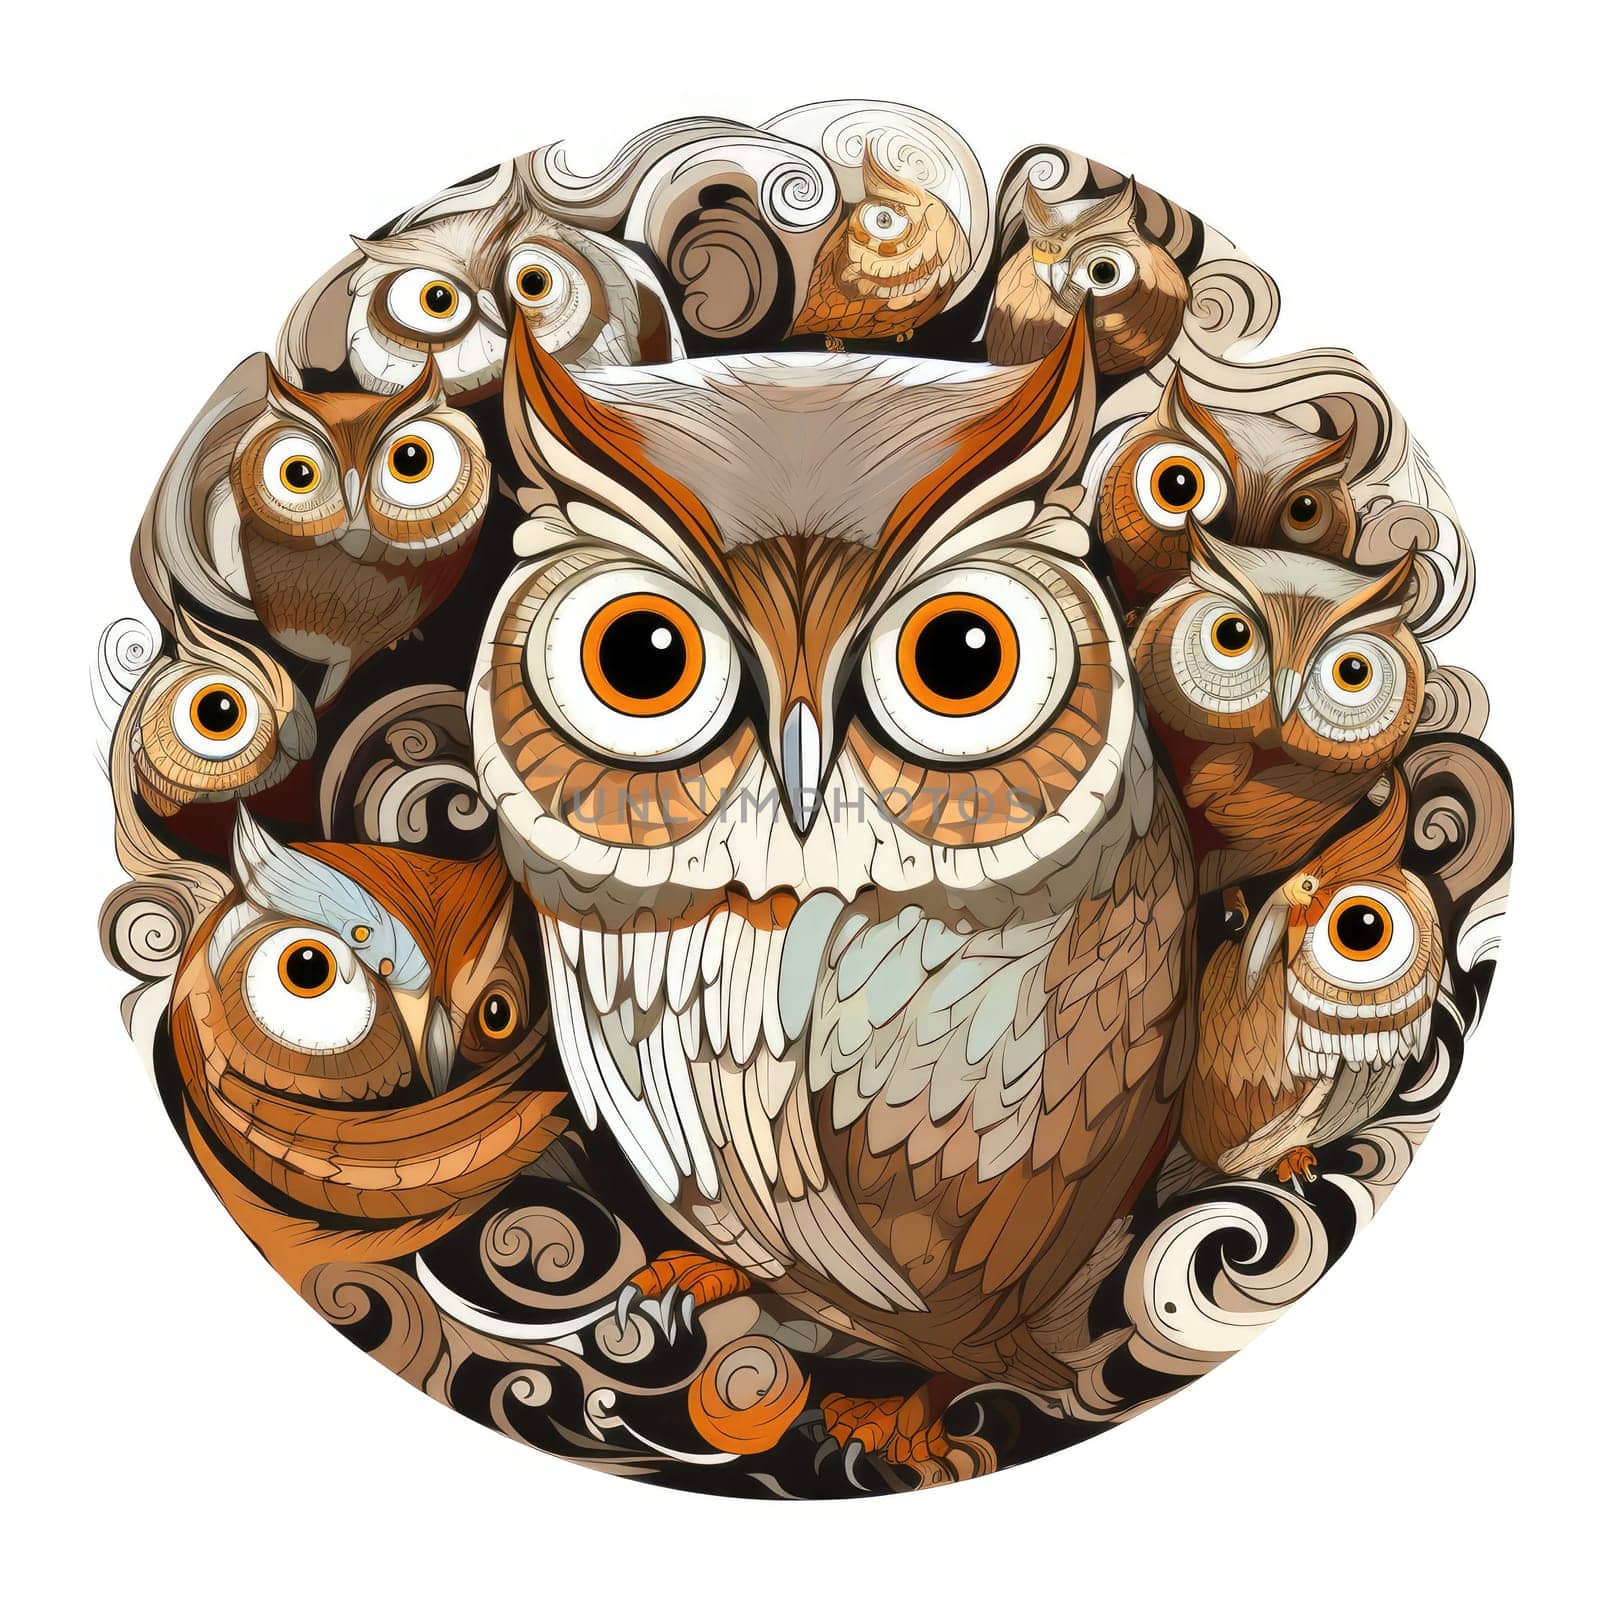 Illustration of an owl family in a decorative art style. by palinchak